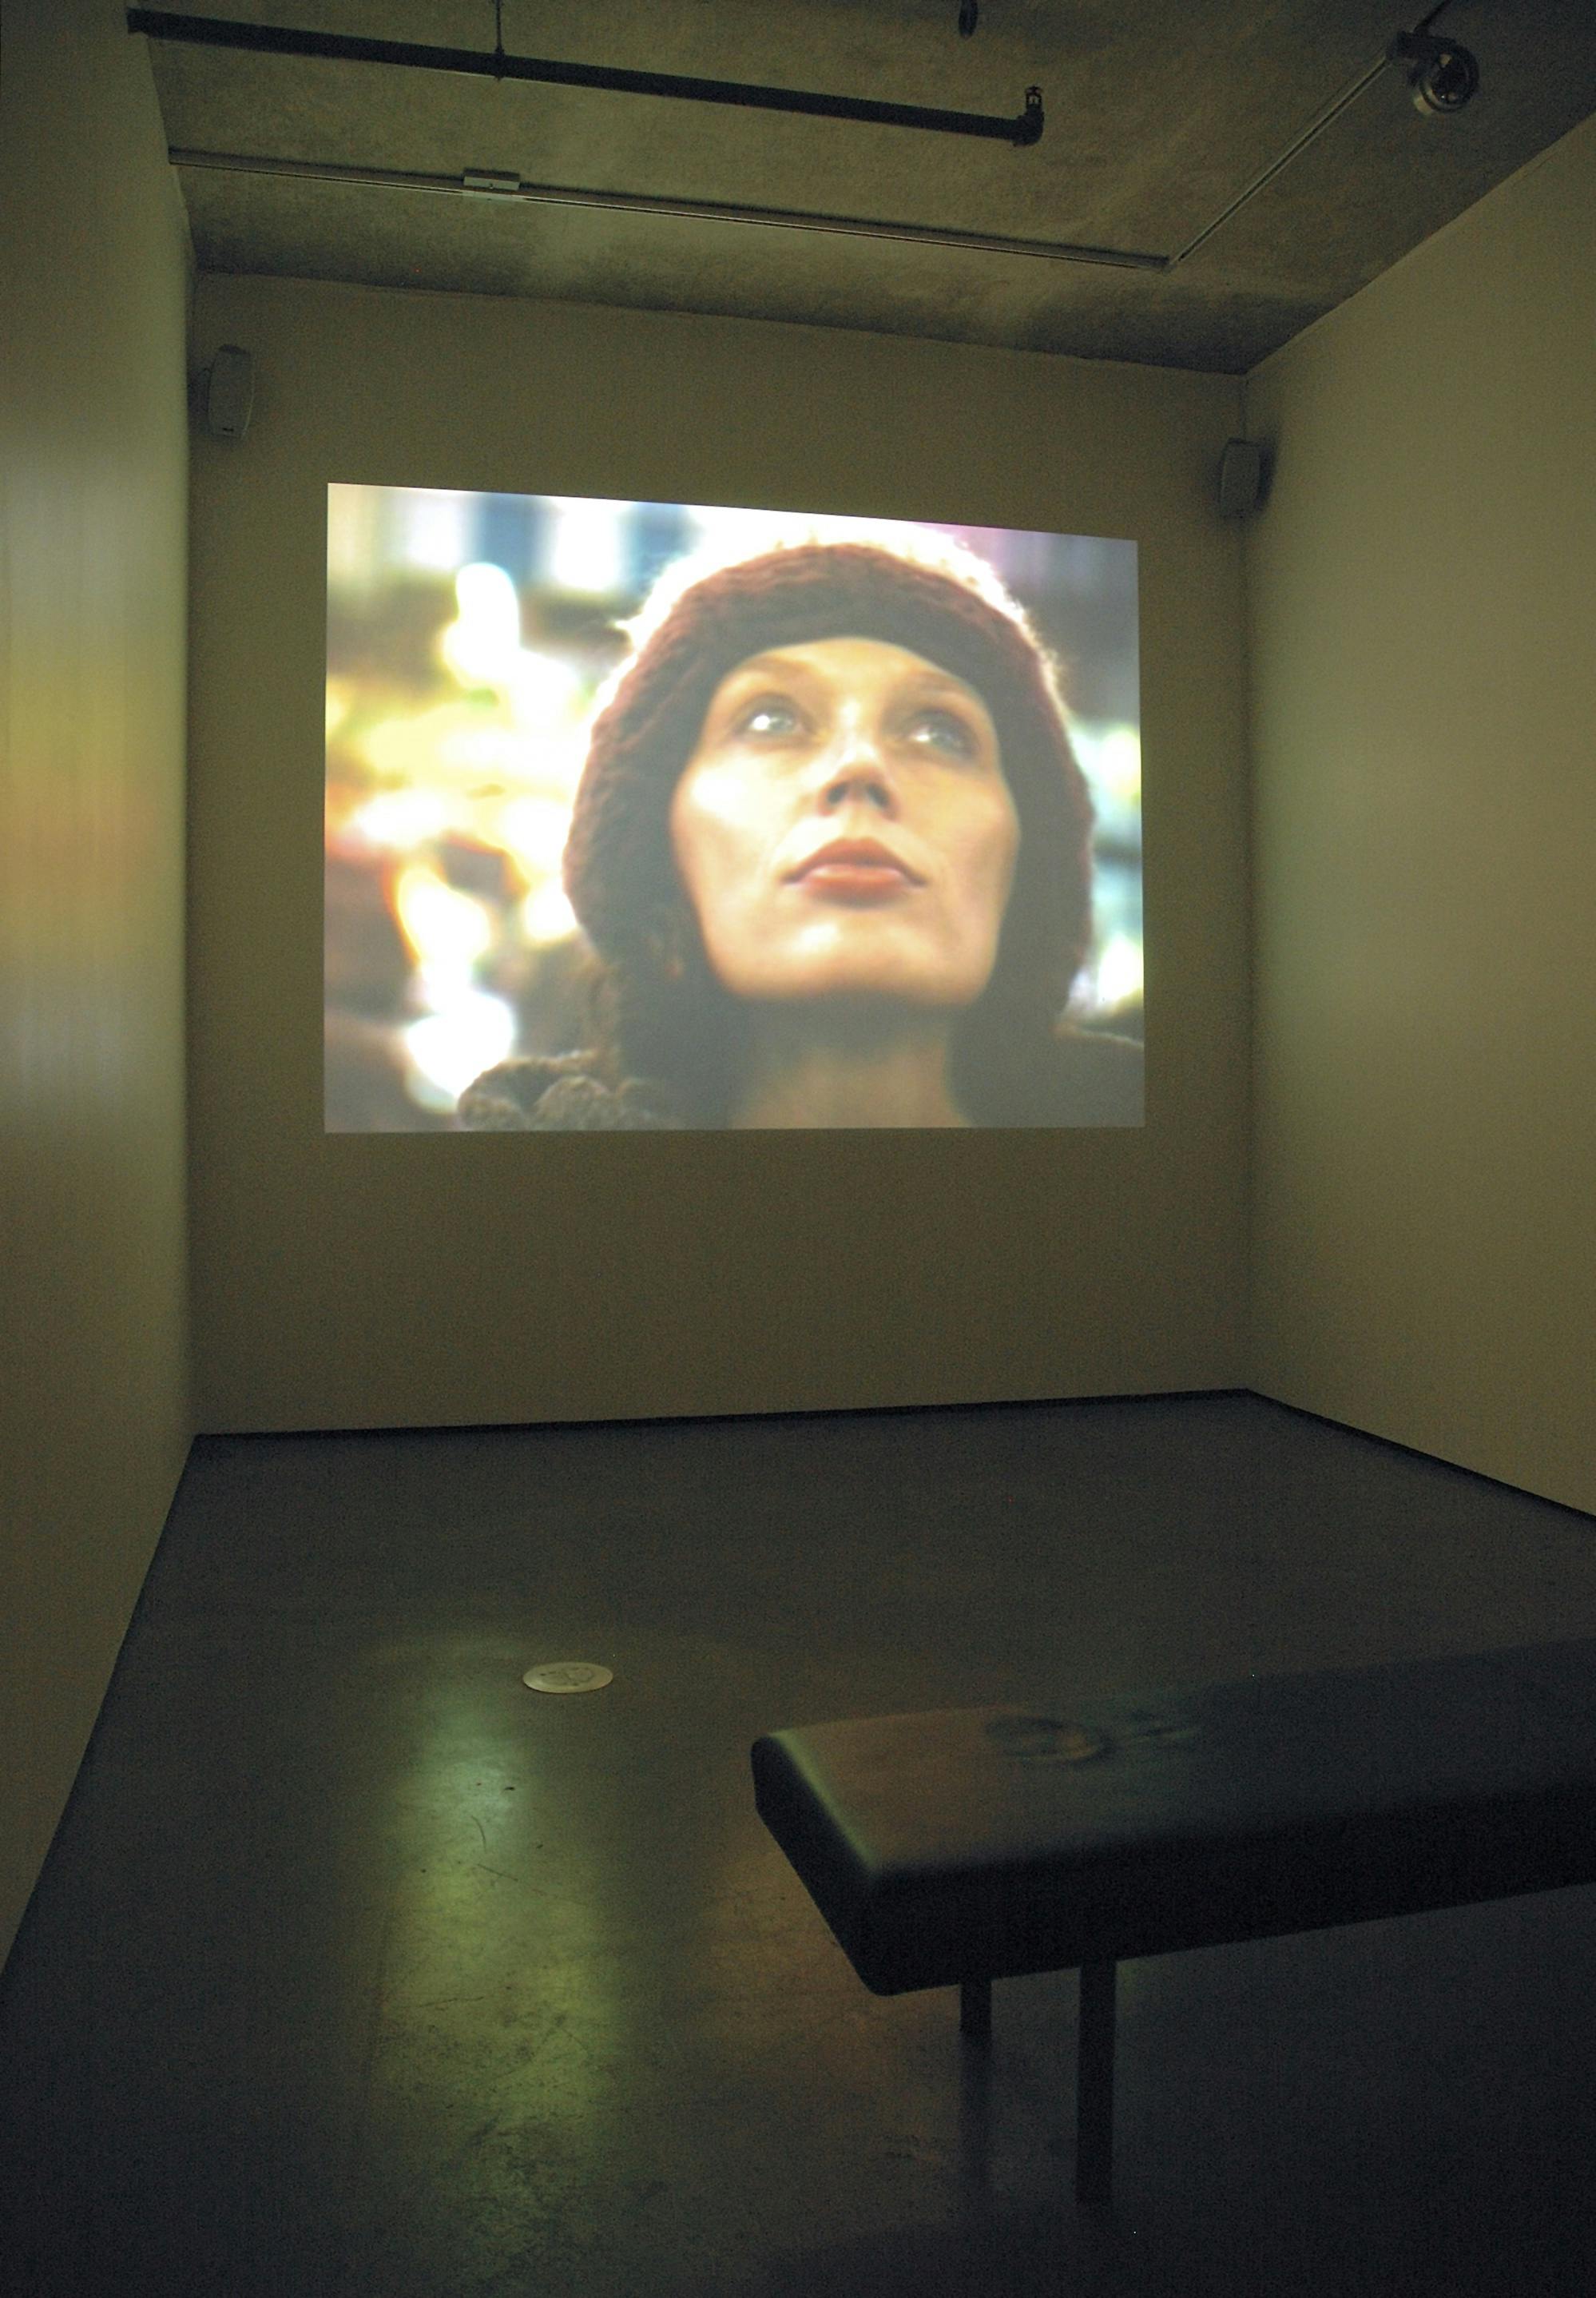 A single-channel video work is projected on one of the gallery walls. The video shows a close-up of a person’s face. The person has blue eyes and wears a red toque.